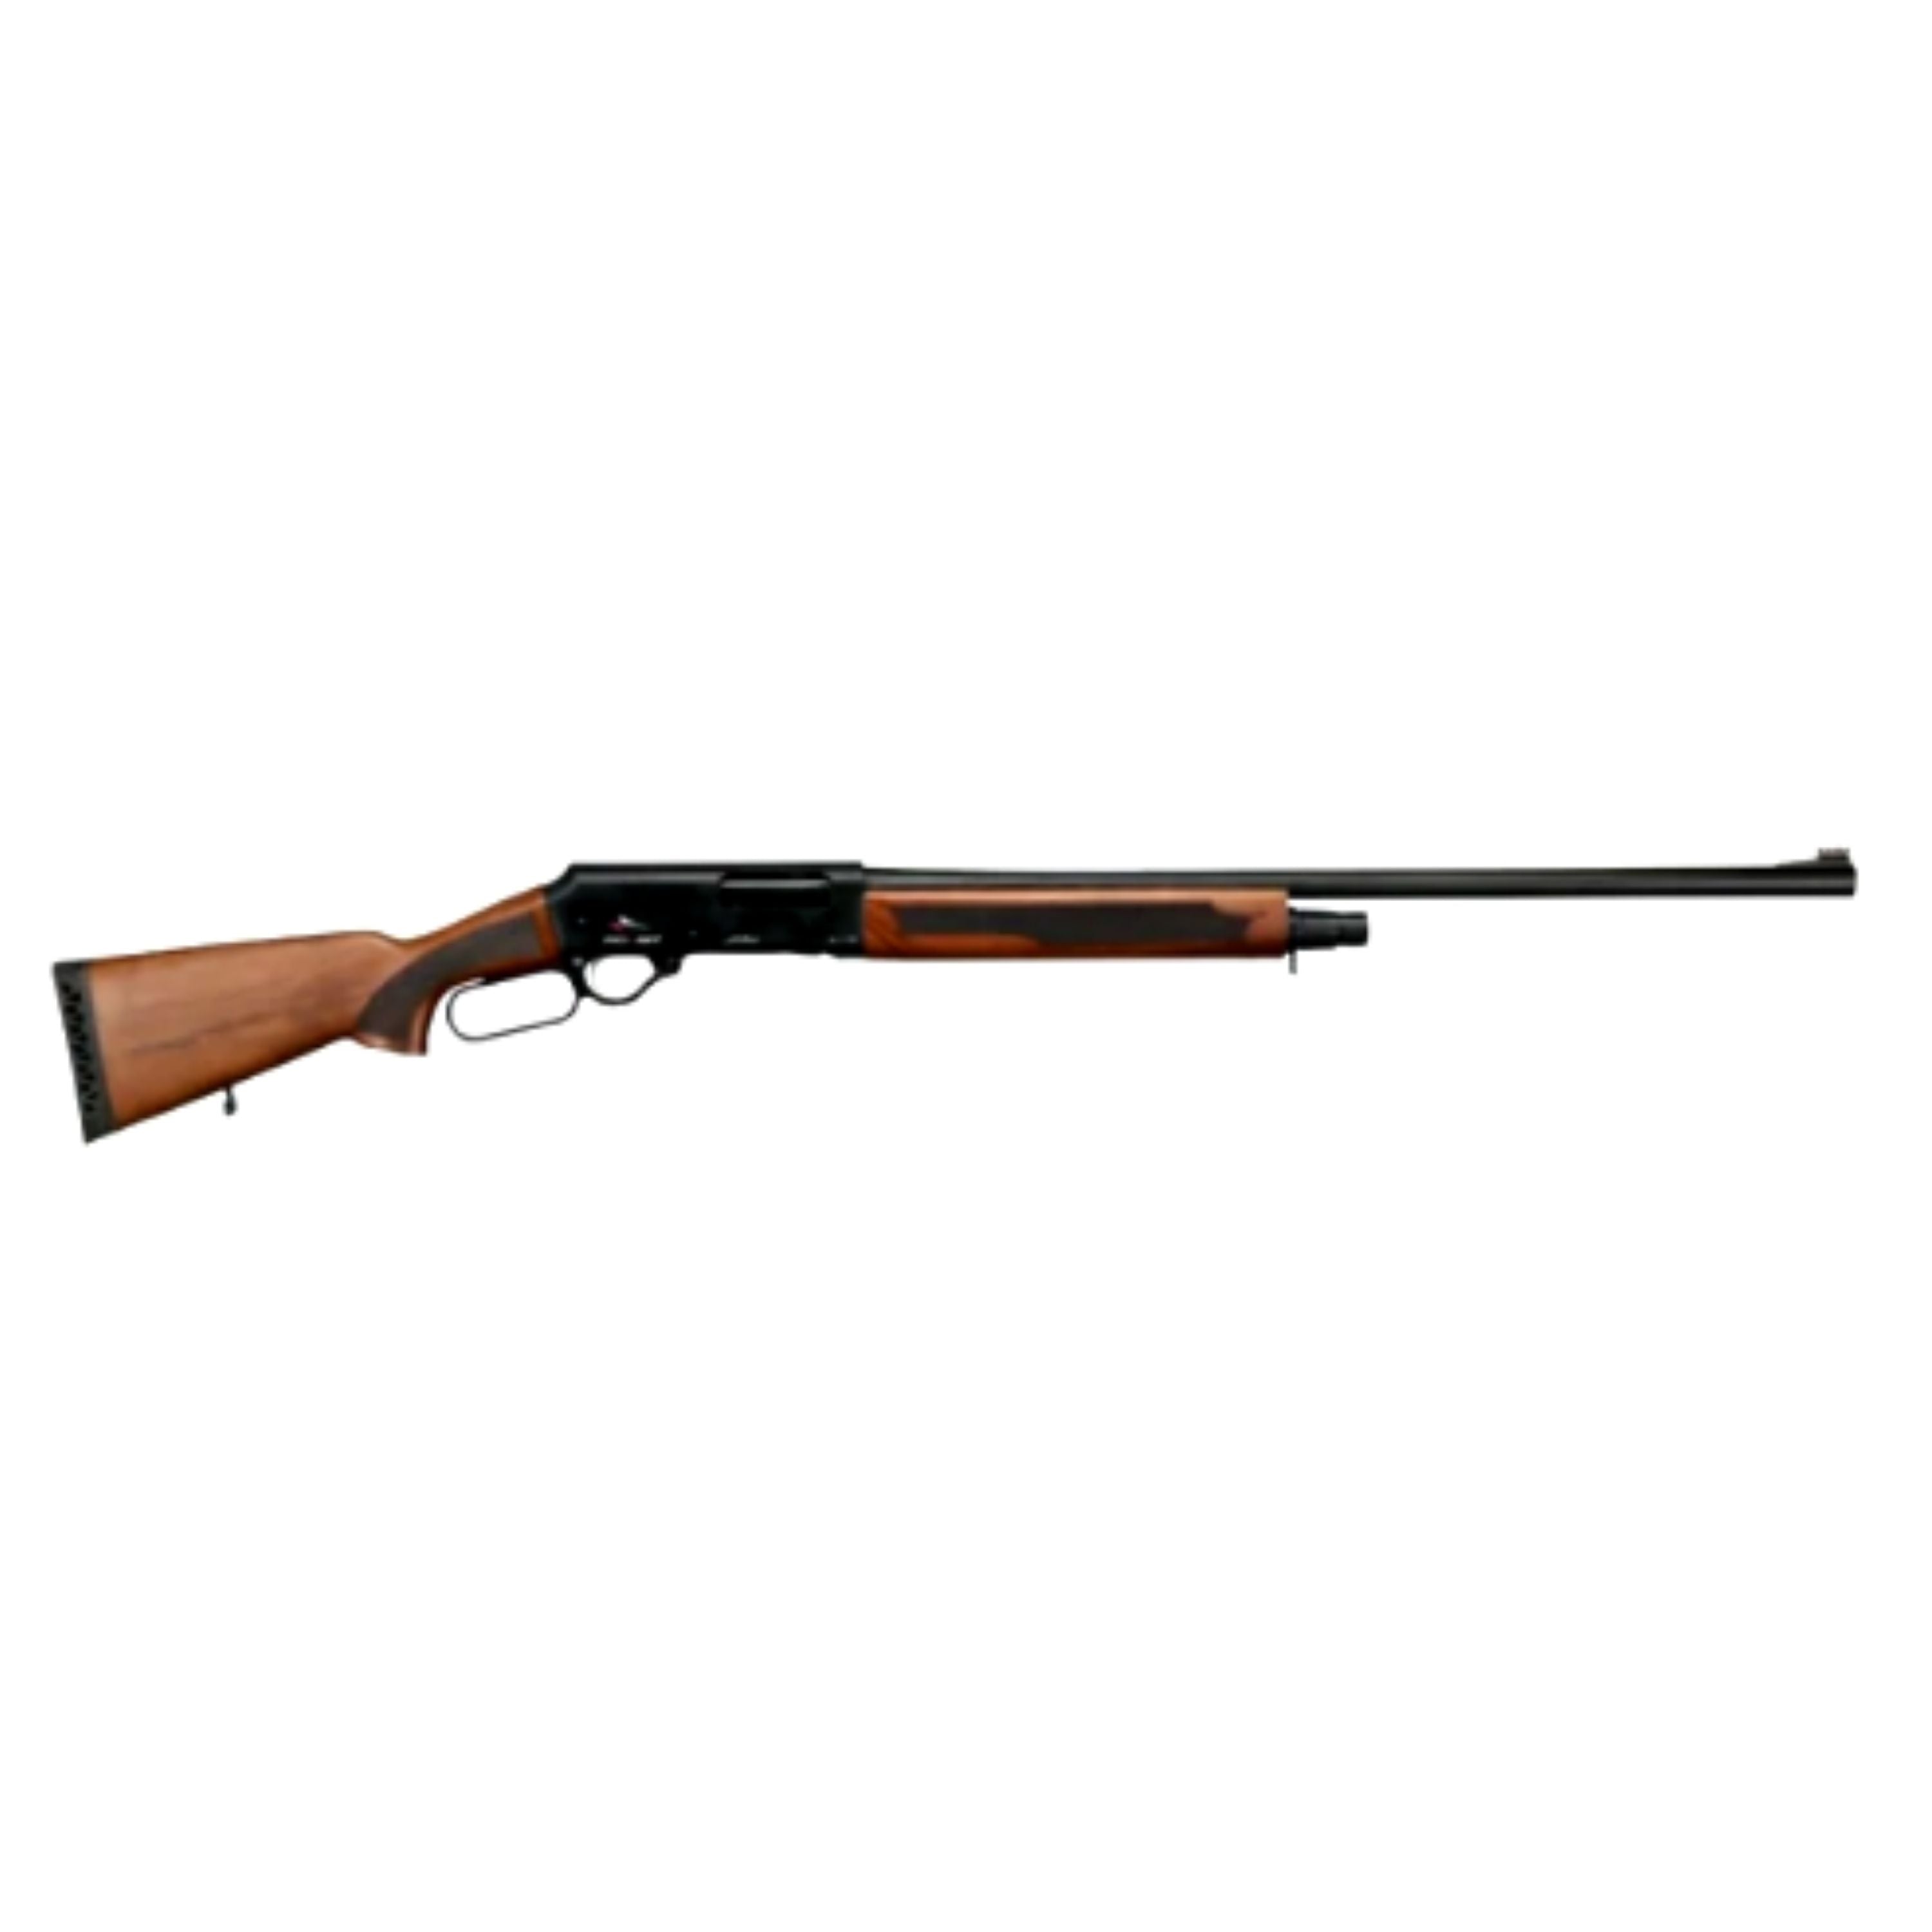 "A-110" and "A-410" Lever action shotgun